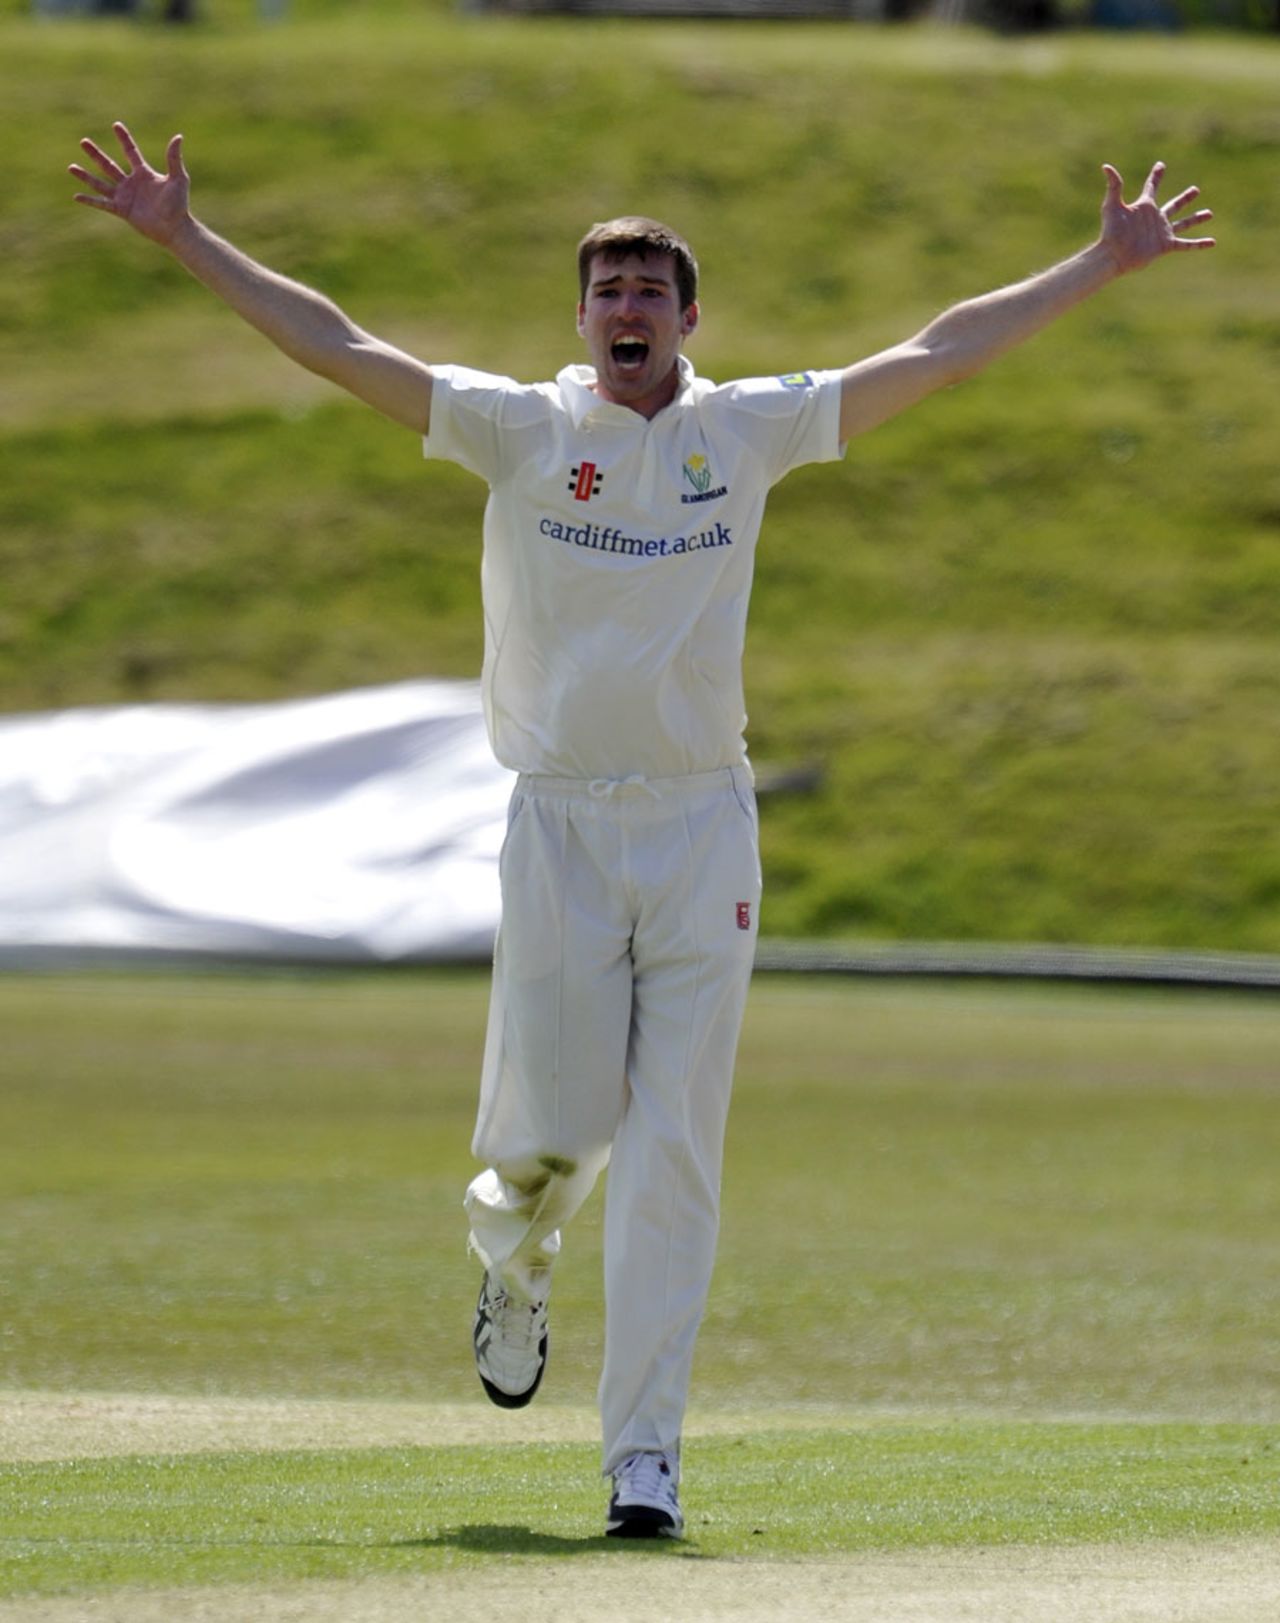 John Glover took 3 for 29, Glamorgan v Lancashire, County Championship, Division Two, Colwyn Bay, 1st day, May 1, 2012